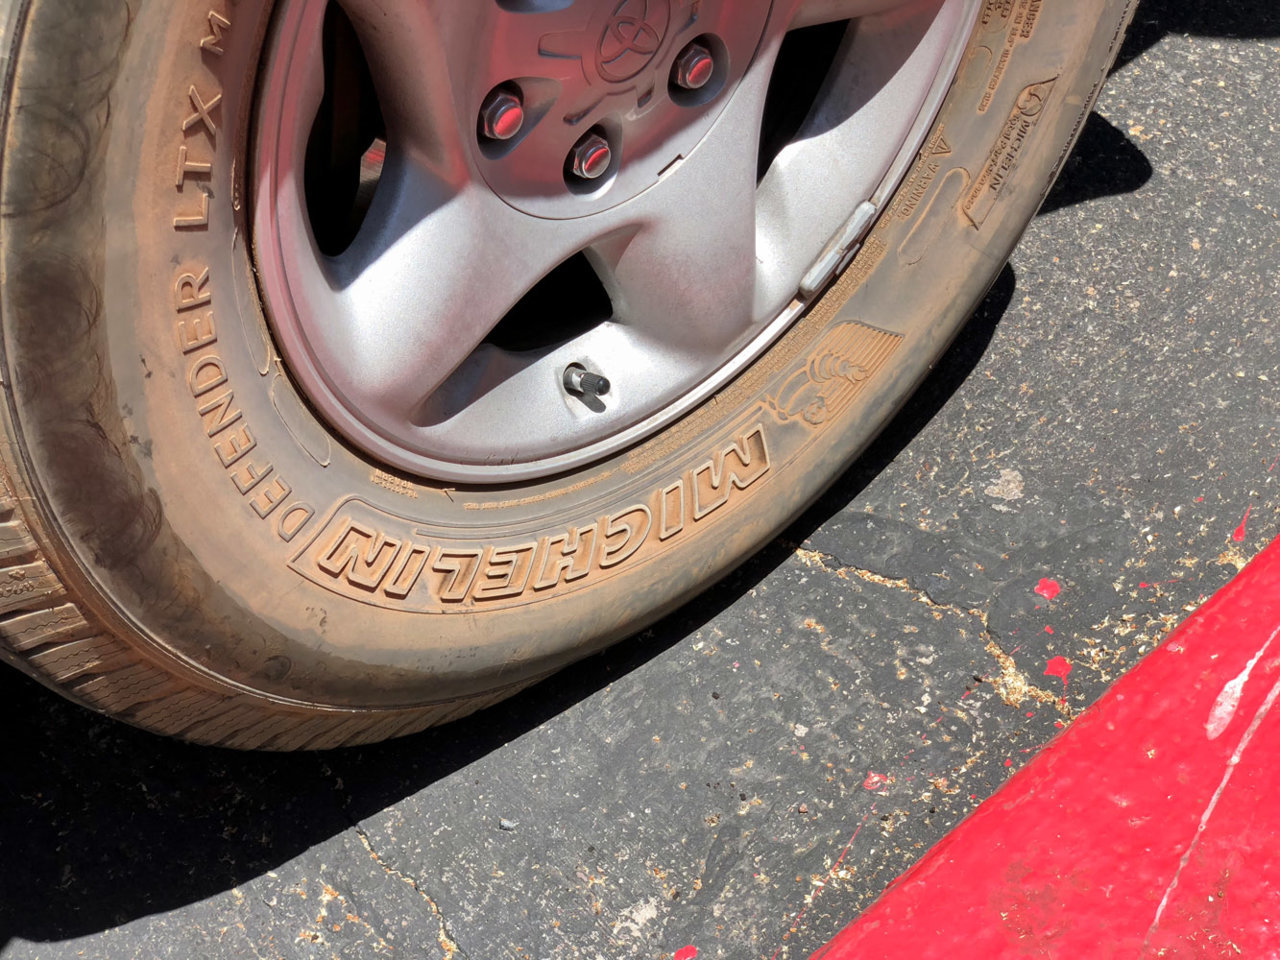 How To Find The Right Tire Pressure For Your 4x4 Using Chalk - The